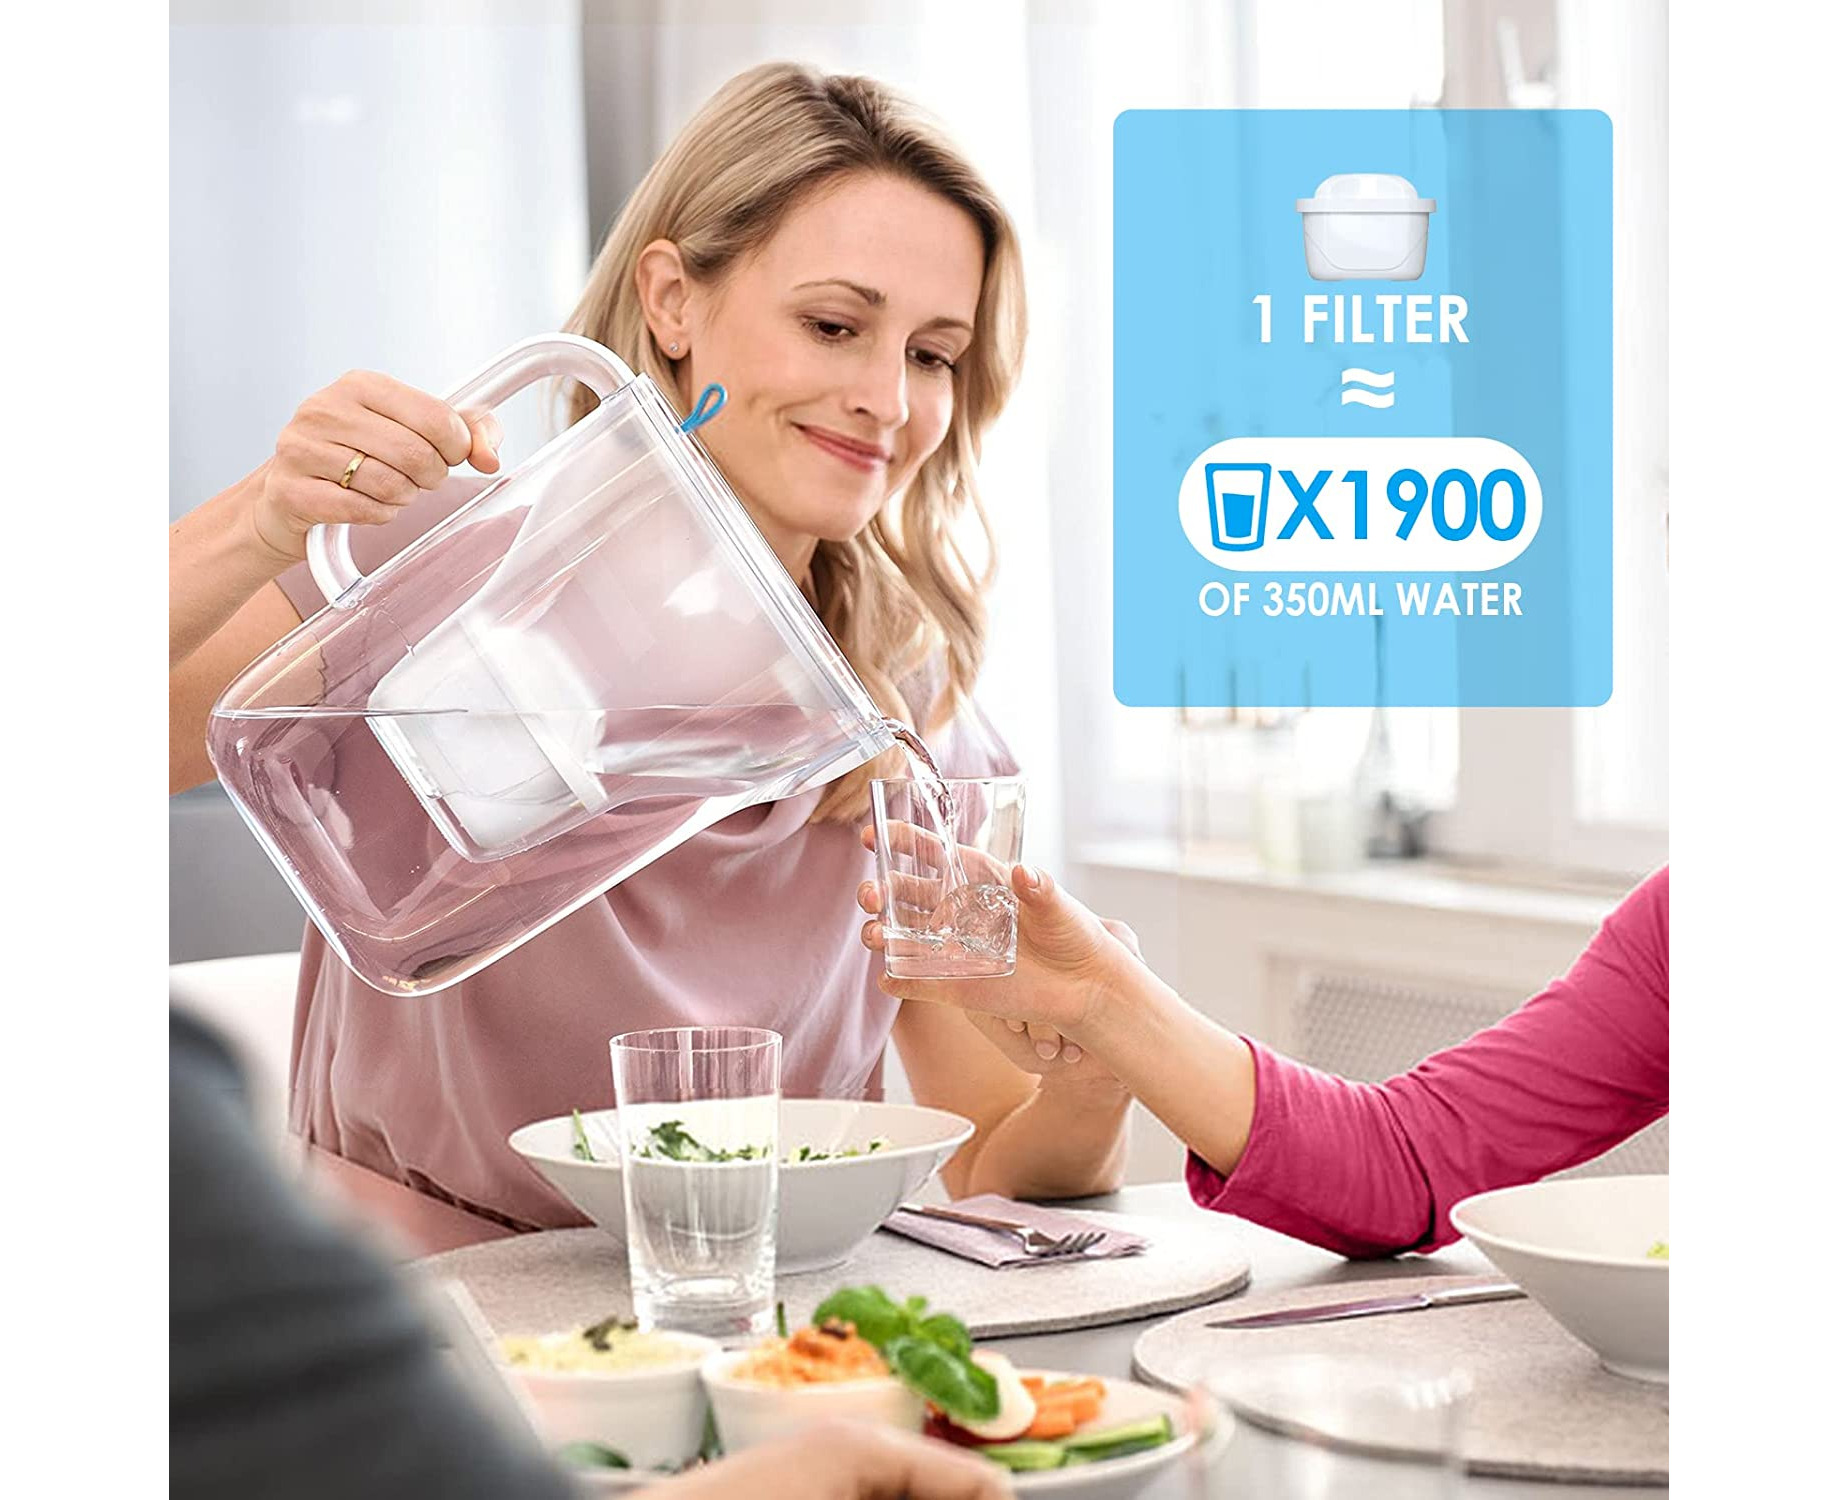  BRITA MAXTRA+ replacement water filter cartridges, compatible  with all BRITA jugs -reduce chlorine, limescale and impurities for great  taste - single : Tools & Home Improvement